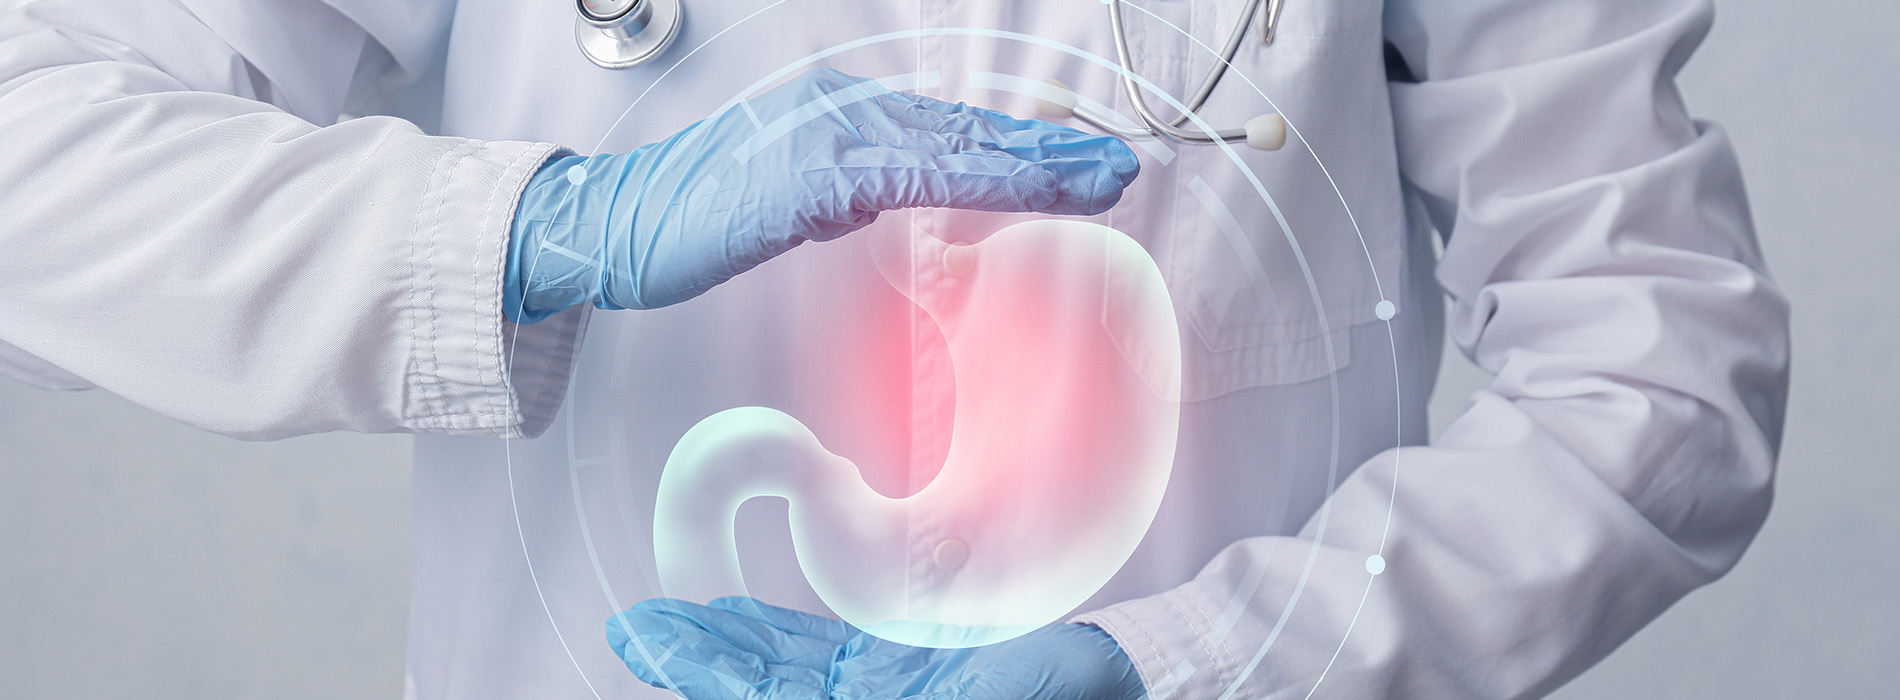 Five Towns Gastroenterology | Colonoscopy, Medication Infusion and Endoscopy